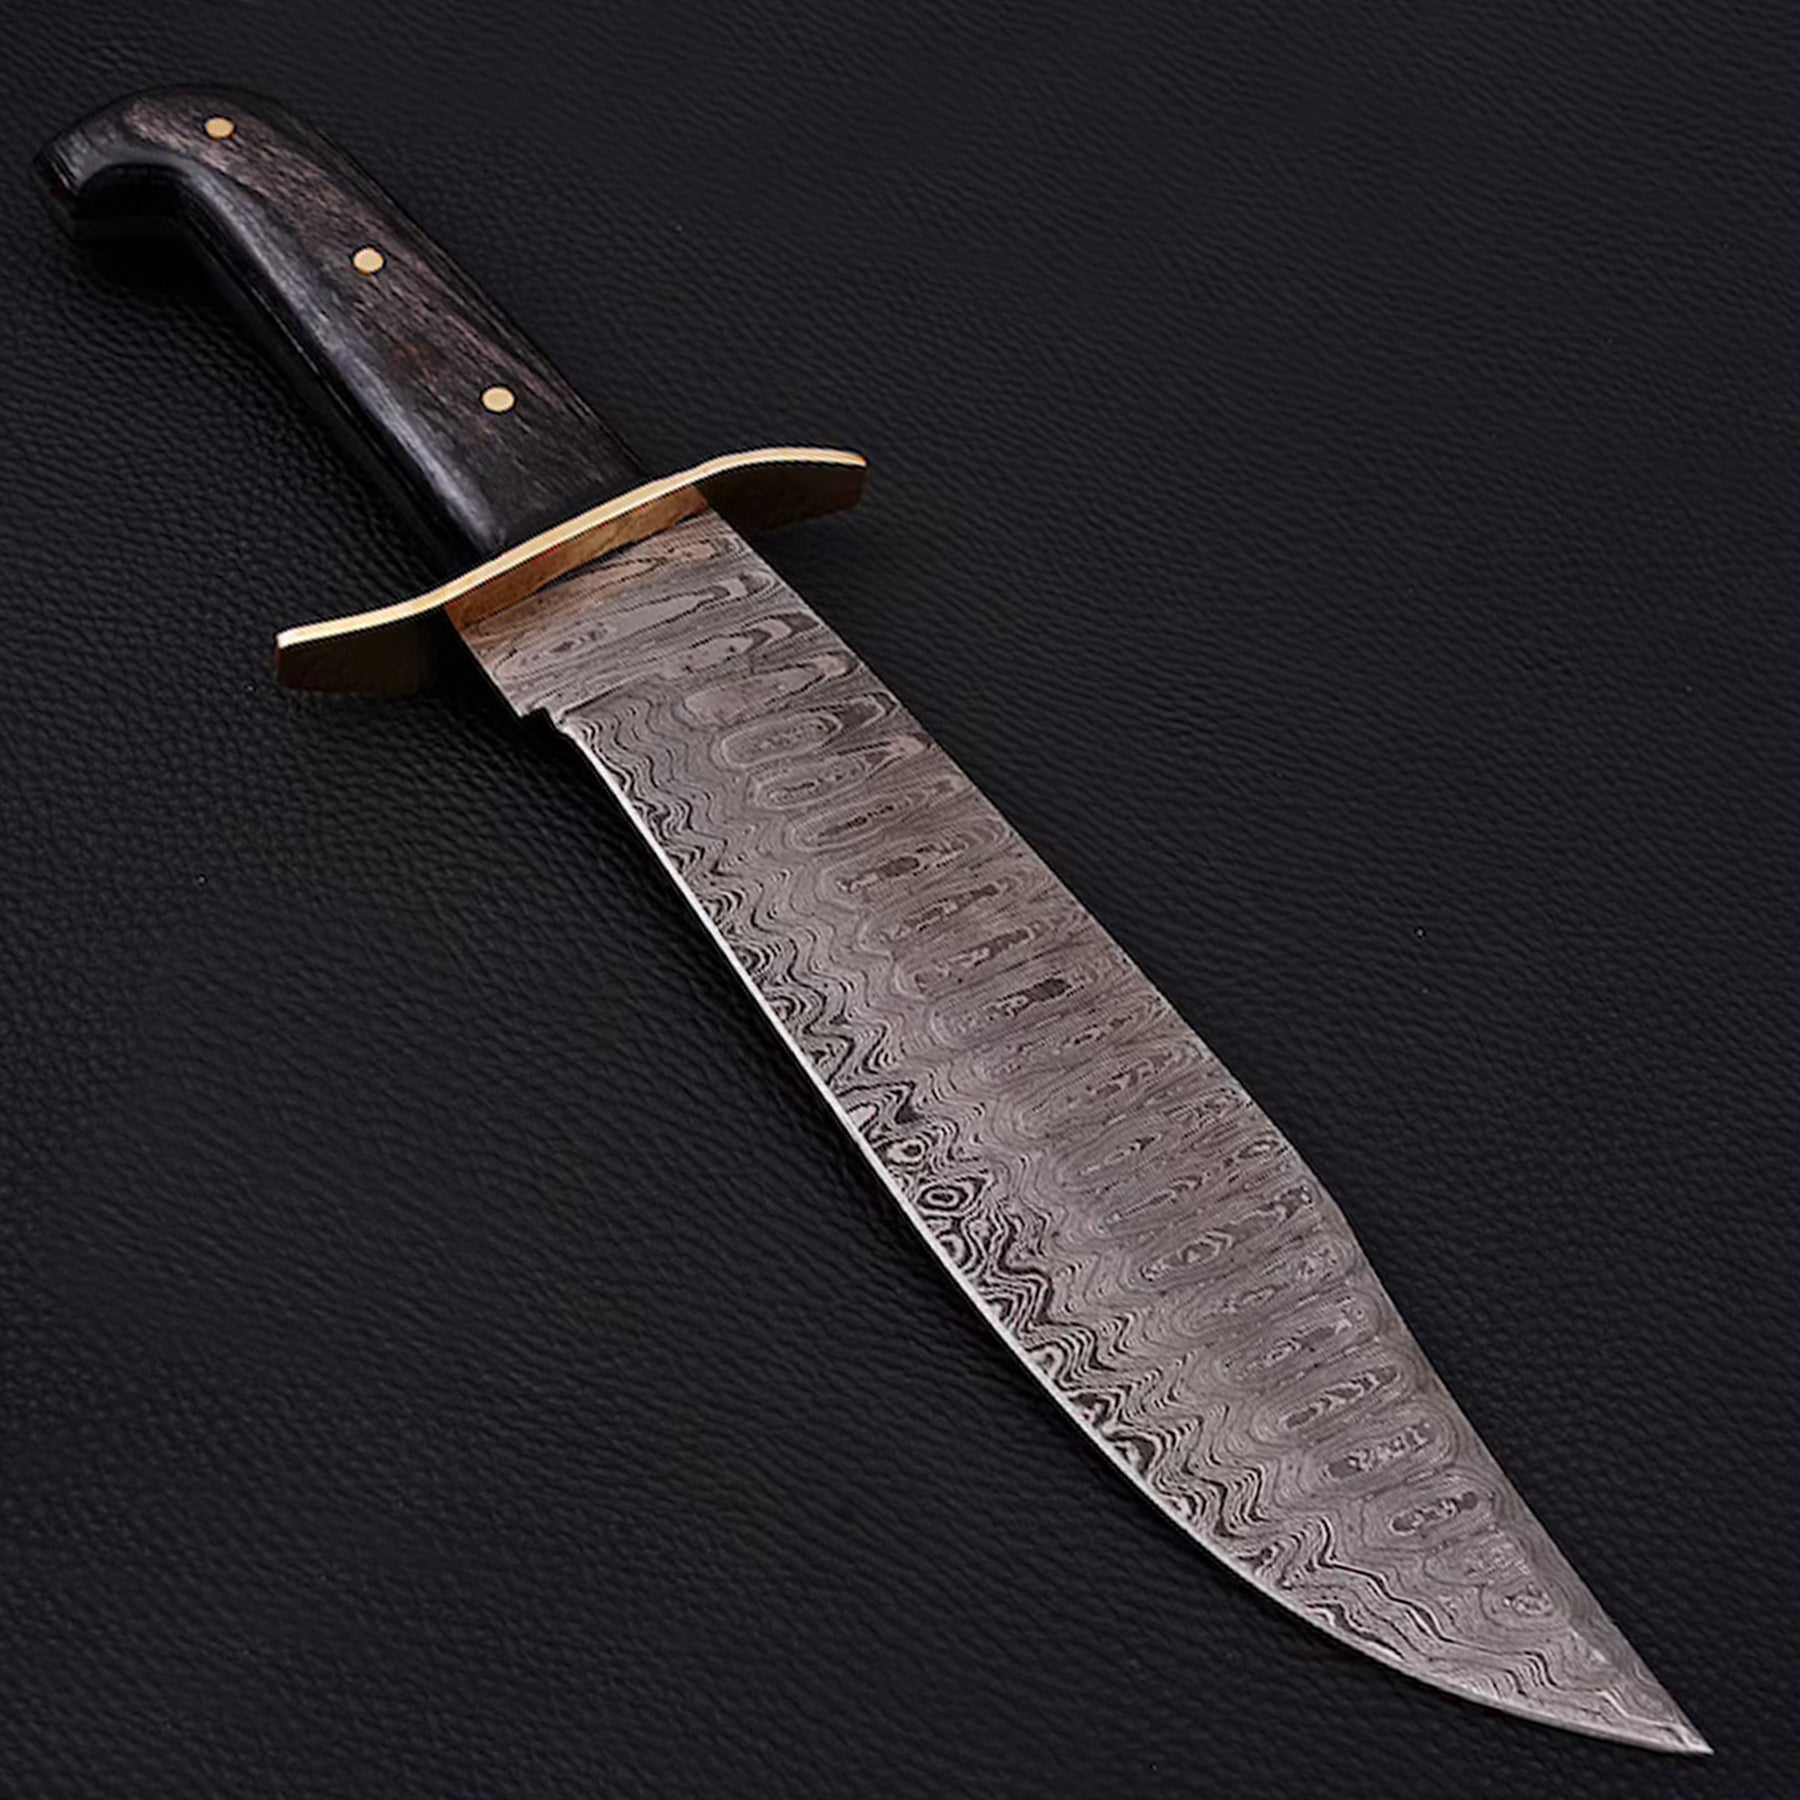 Bowie Knife Full Tang Damascus Steel Hunting Knife DK-007 – The Bowie Knife